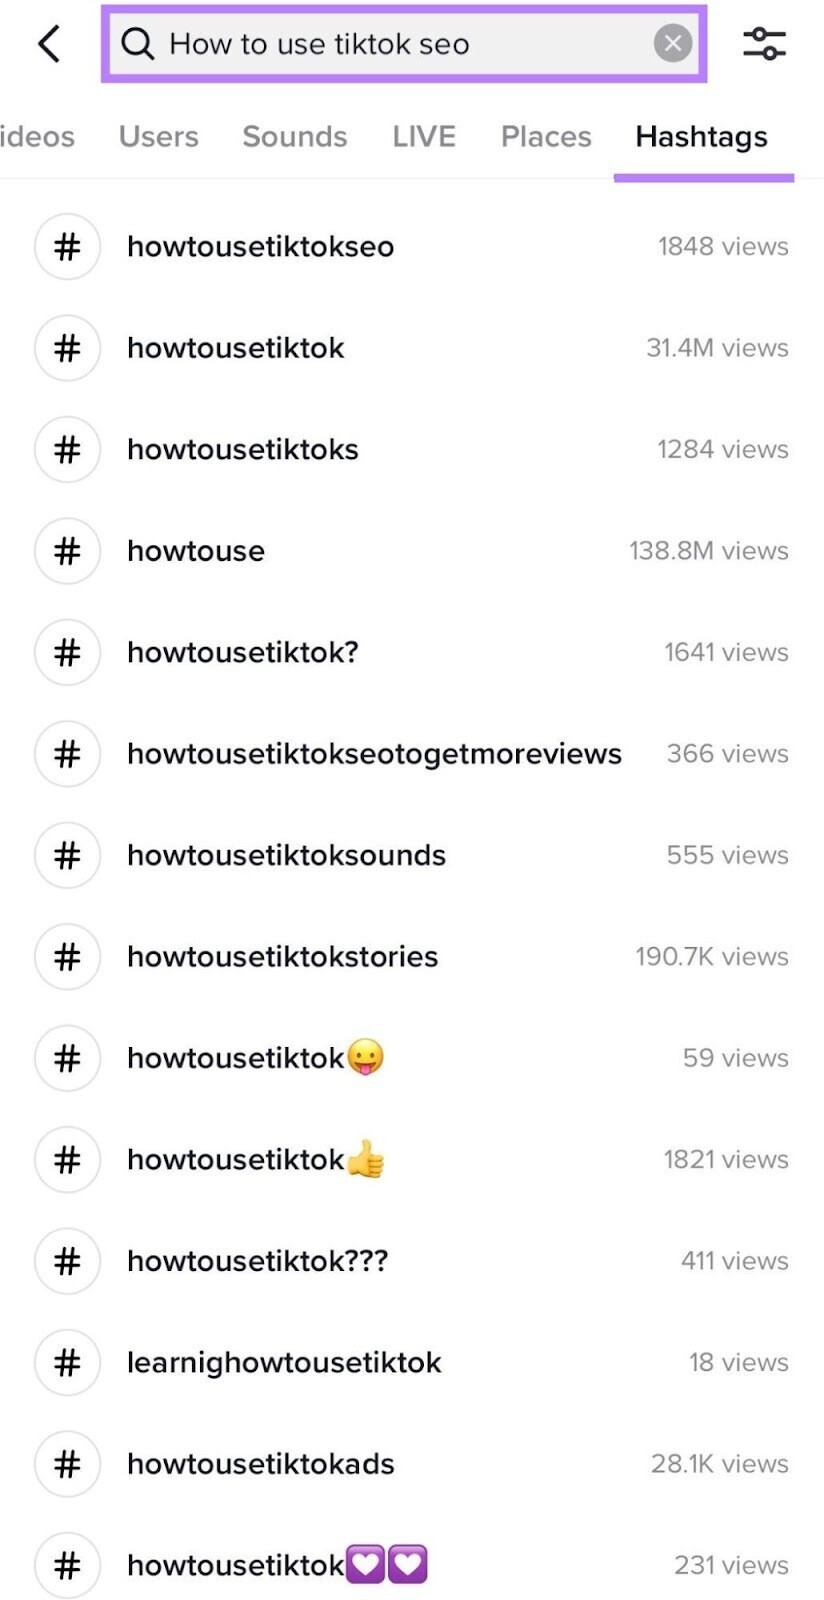 searching for "how to use tiktok seo" to find related popular hashtags